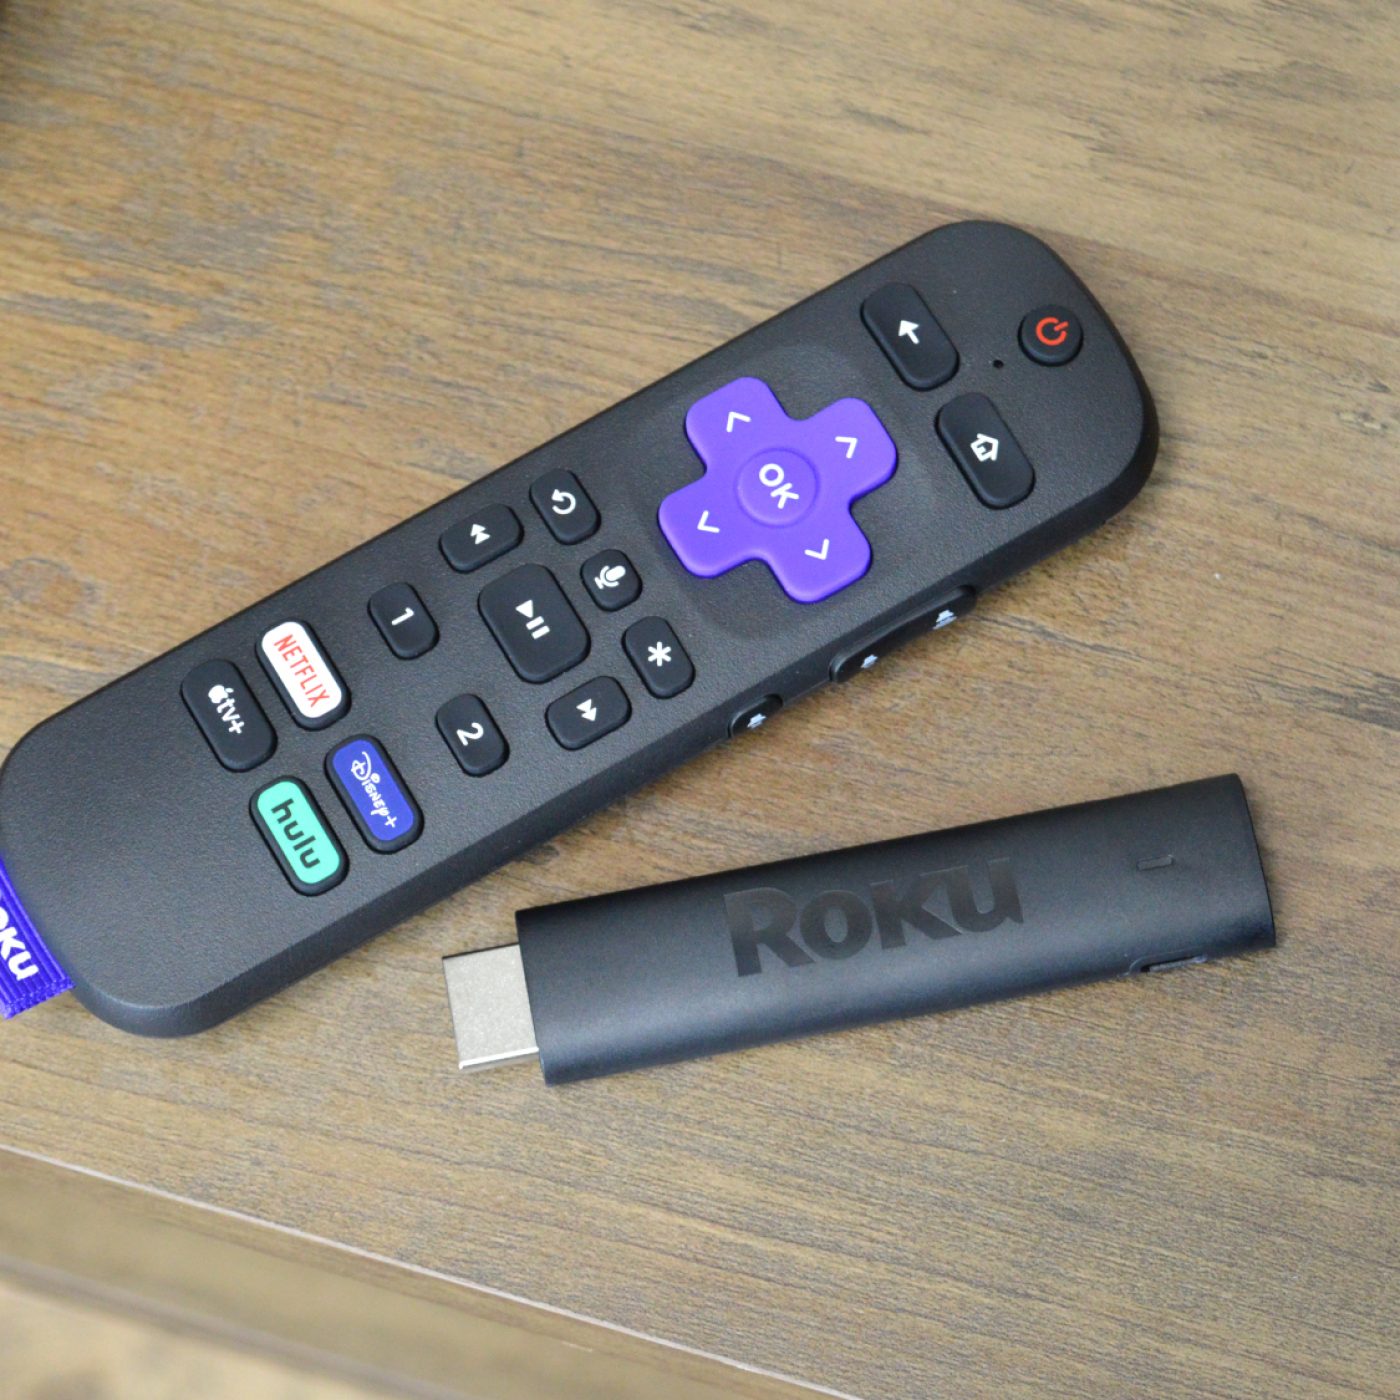  Roku Streaming Stick 4K 2021 Device HDR/D. Vision with